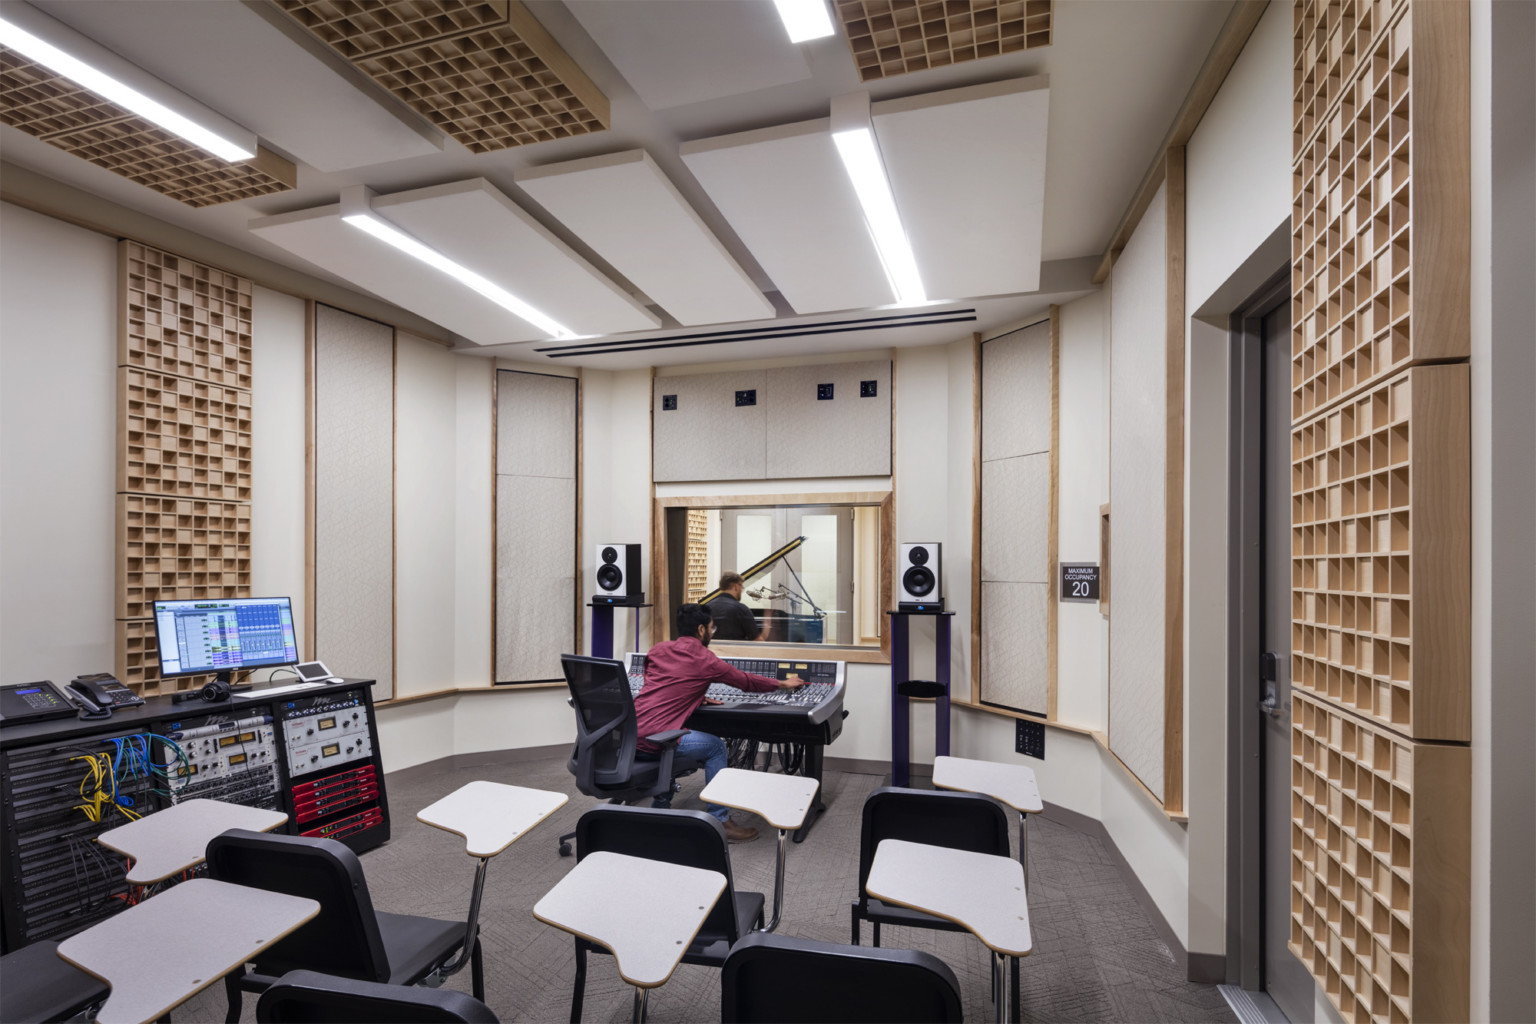 Student working in recording studio with white and wood panels on walls and ceiling